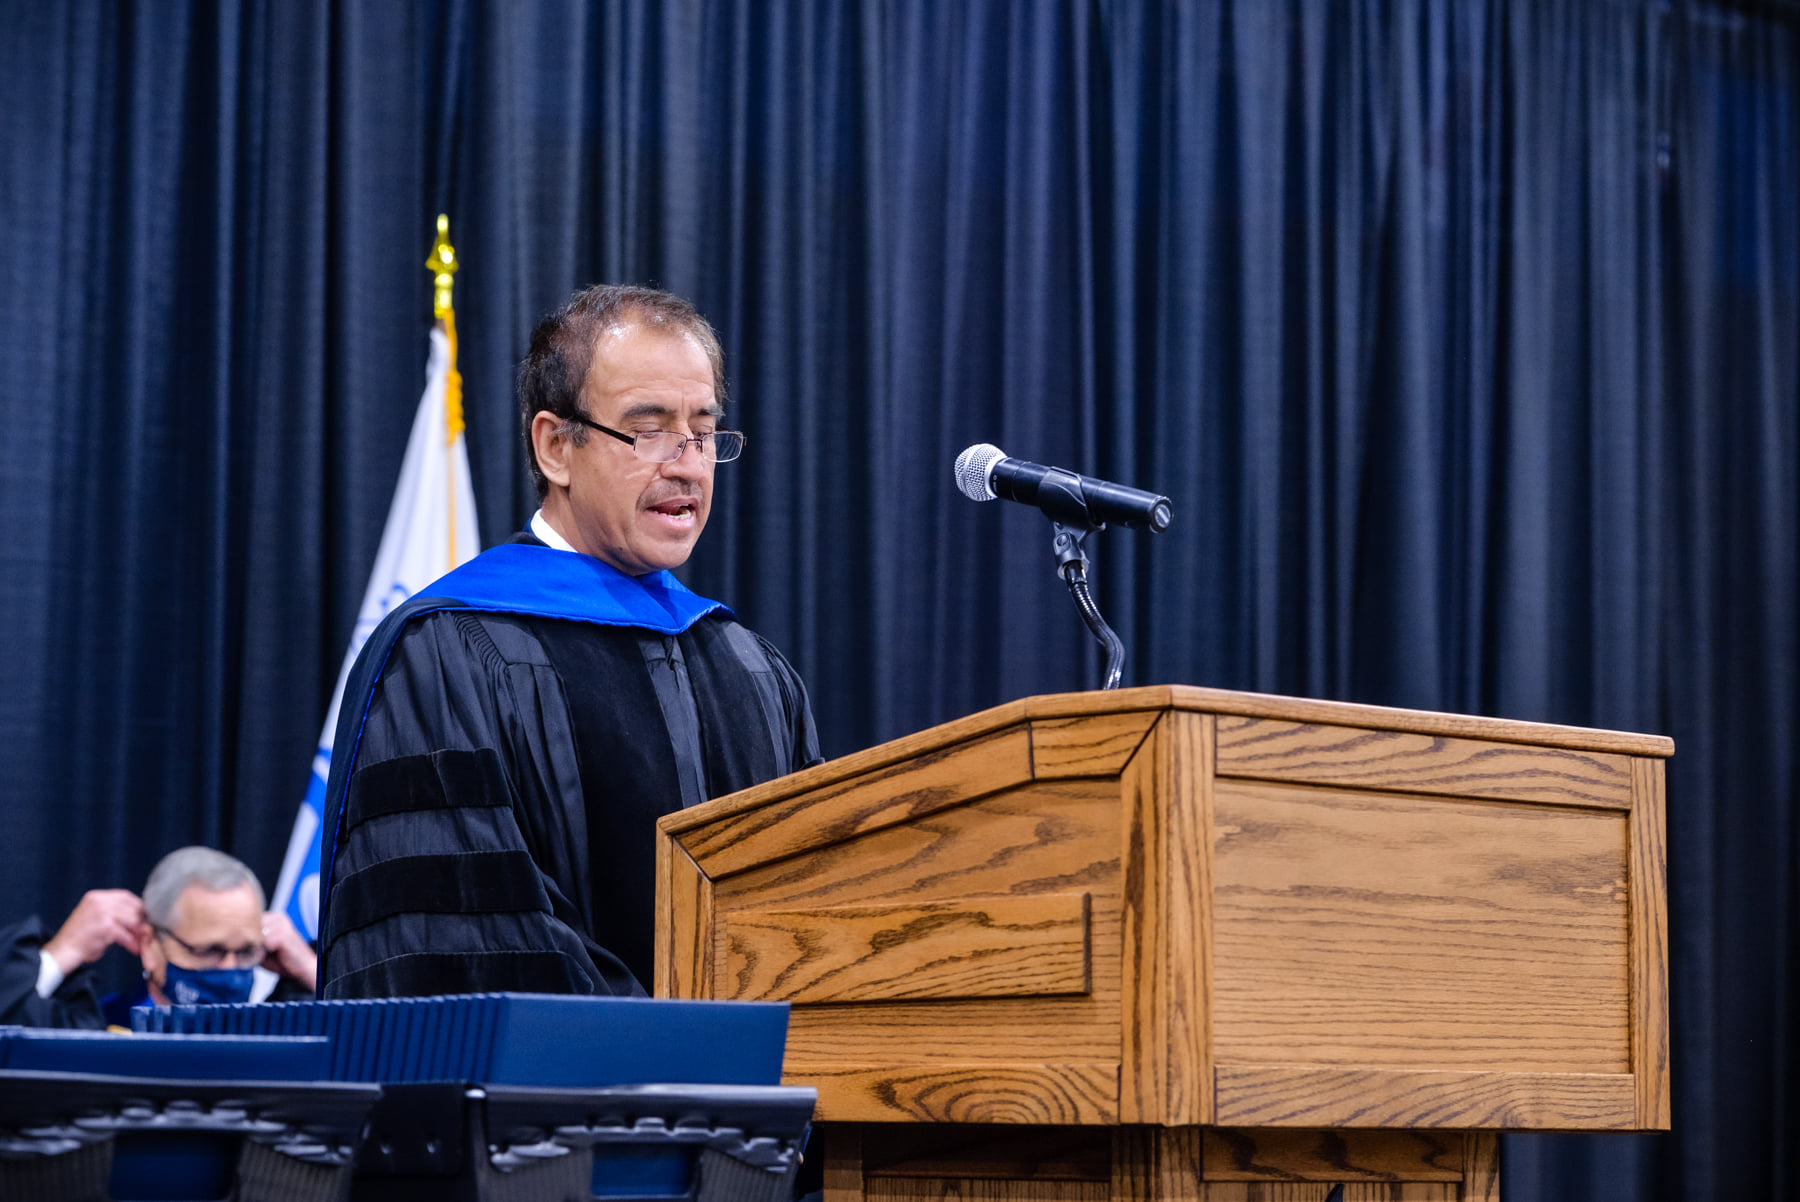 Dr. Gul Ahmad speaks at the podium during commencement.